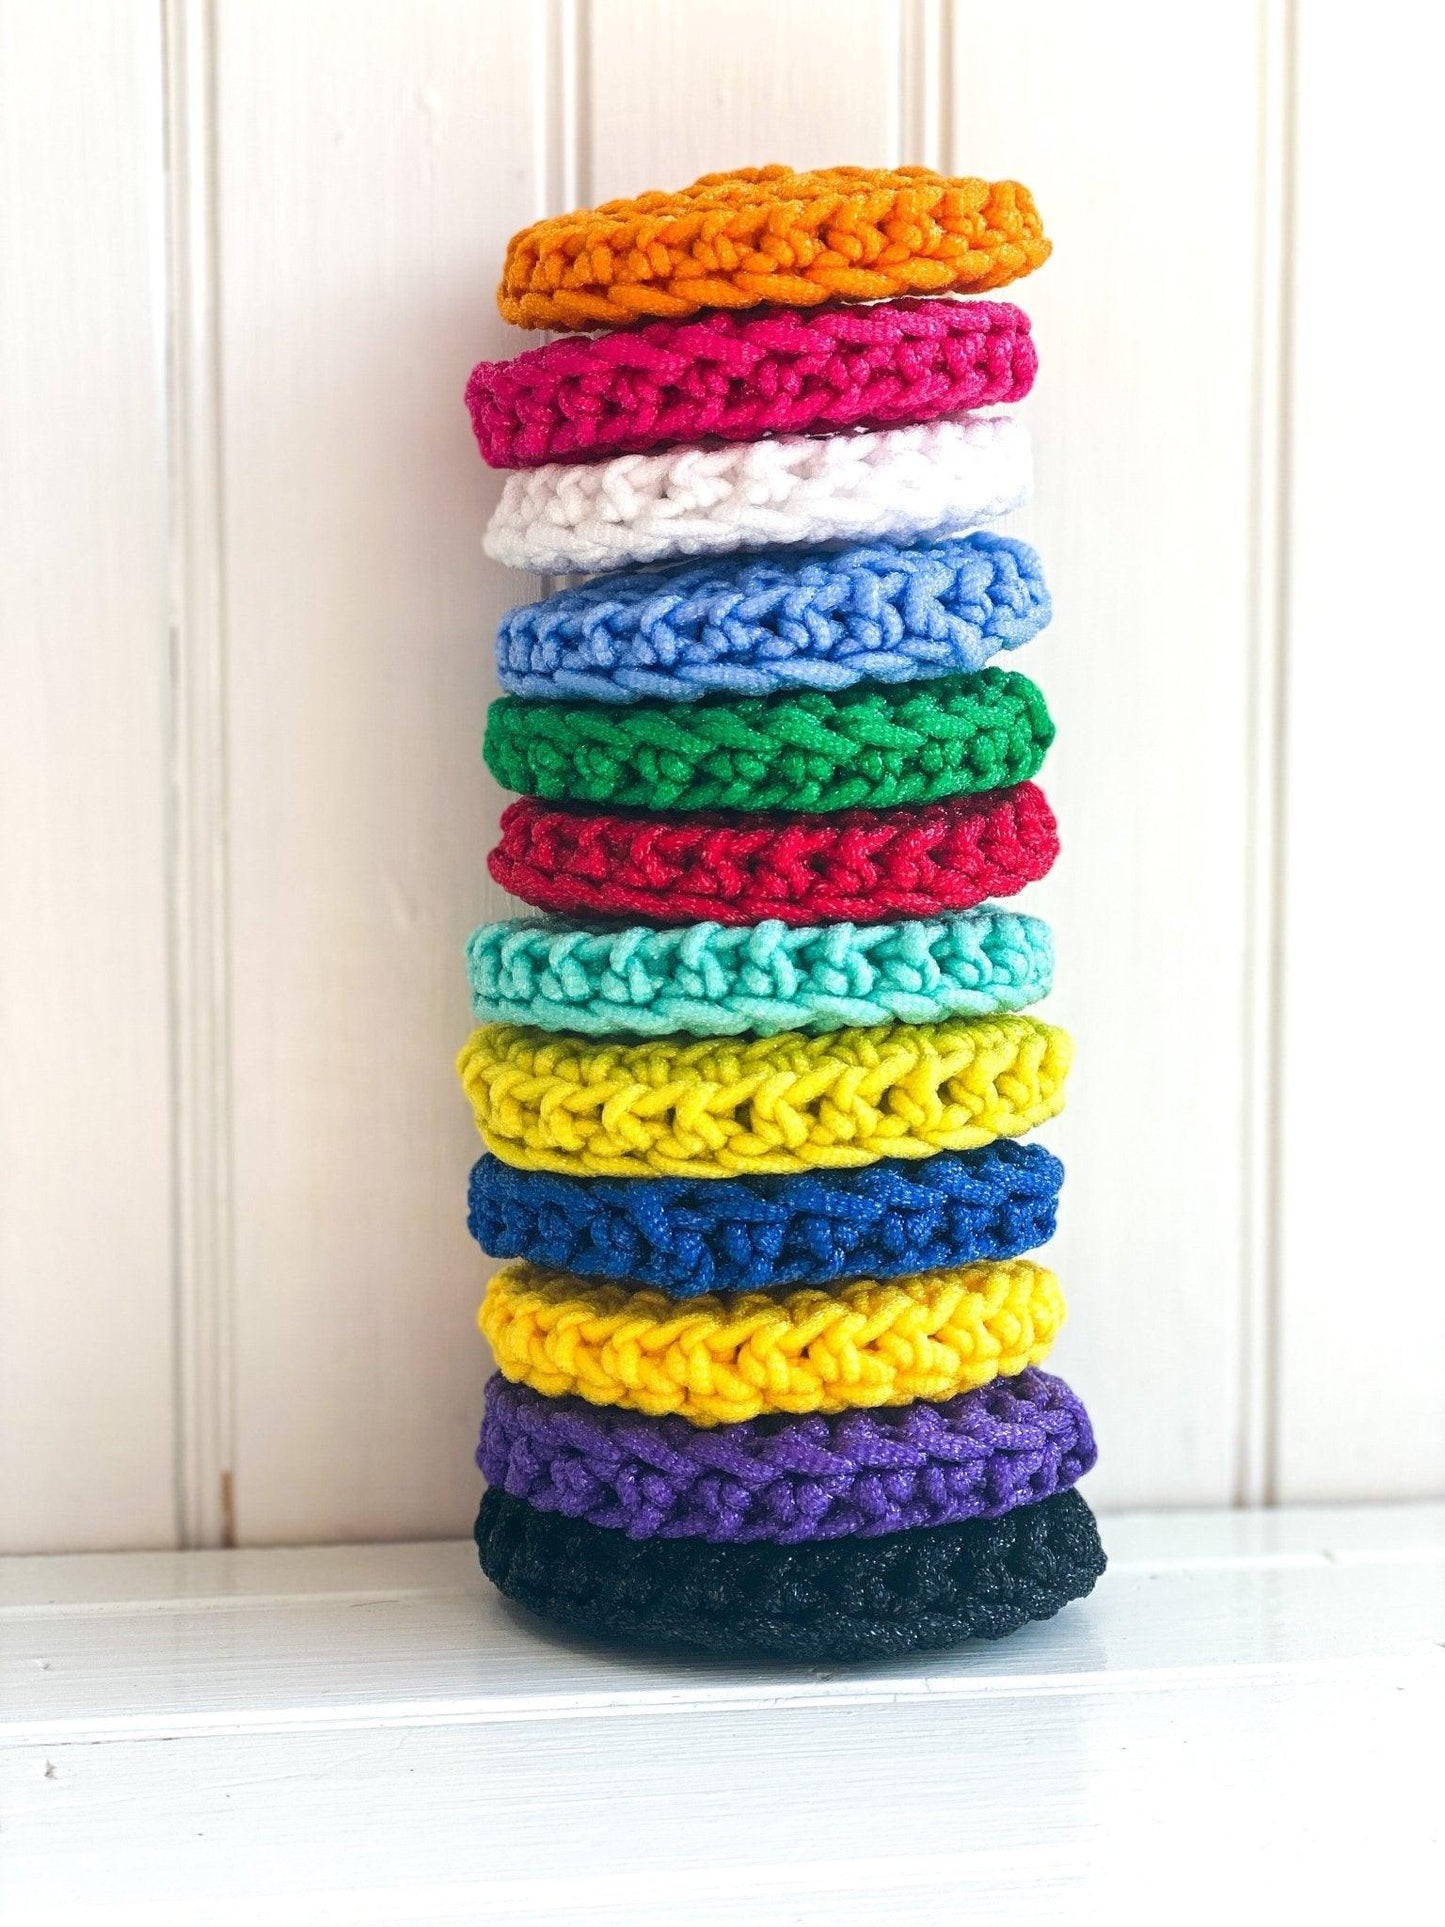 Tall Stack of Colorful Handmade Crochet Dish Scrubbies